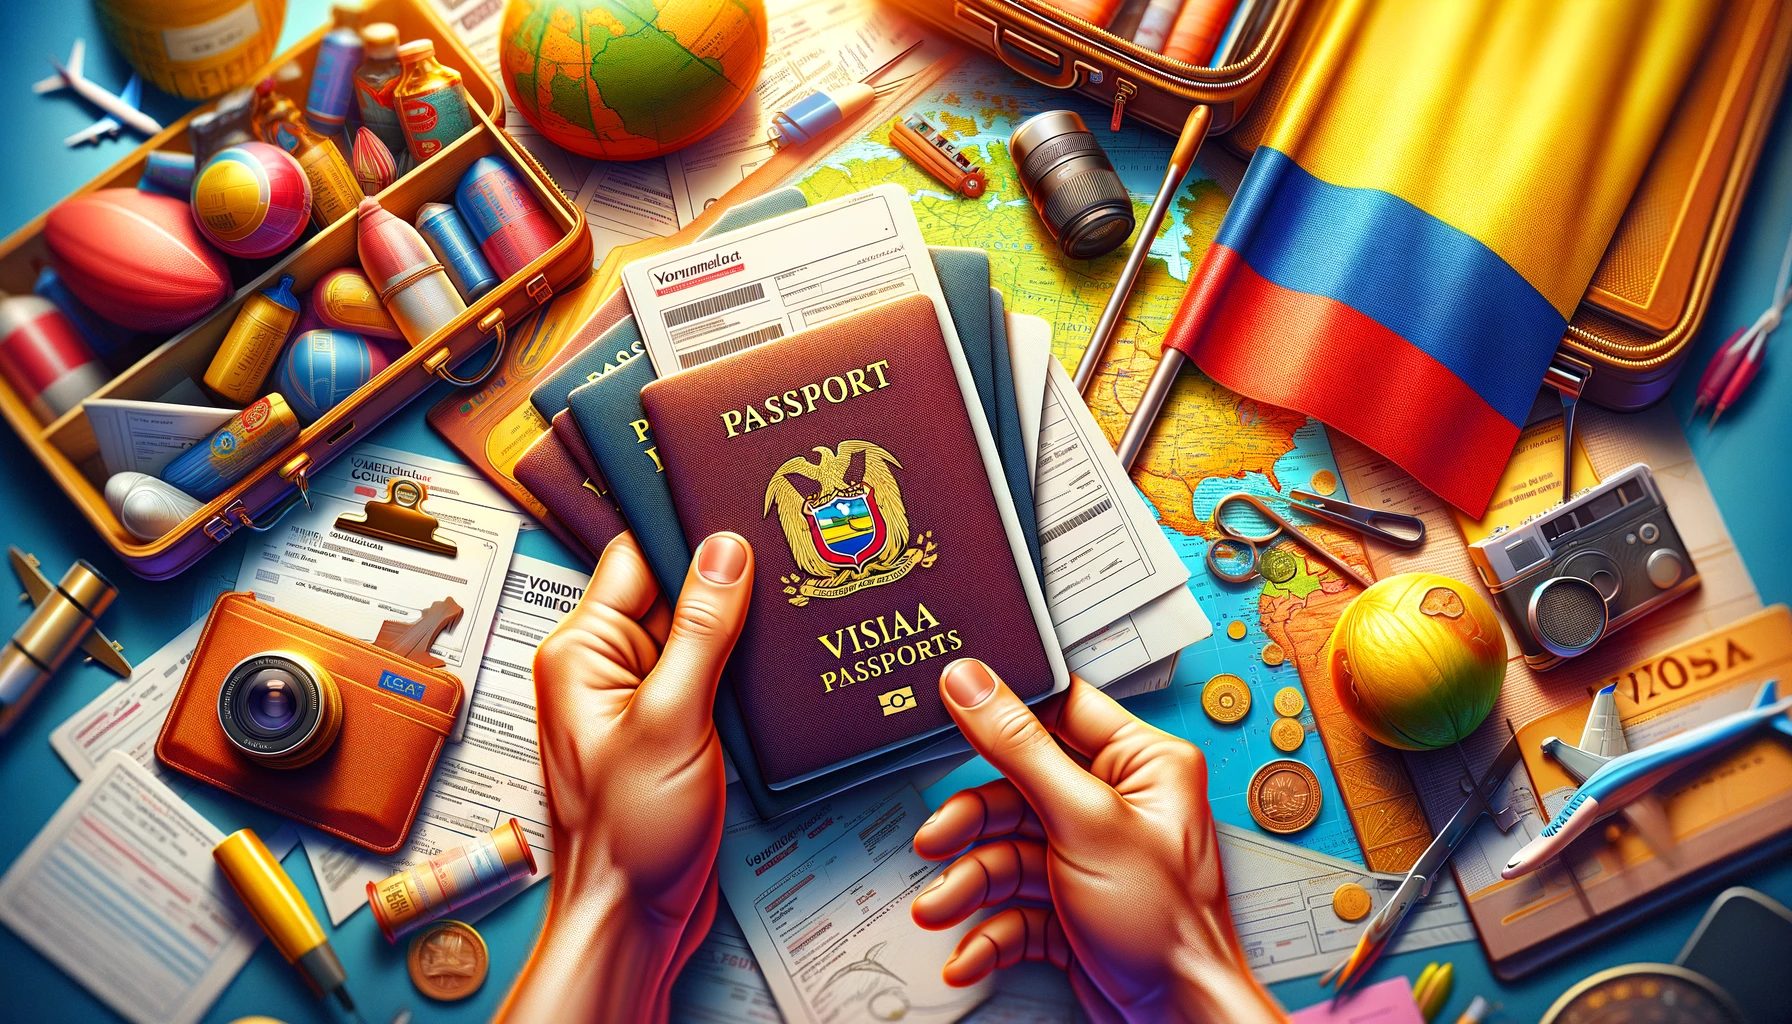 Colombia visa requirements, entry rules for Colombia, Colombian visa policies, how to get a visa for Colombia, Colombia entry regulations, Colombian visitor visa information, Colombia travel documentation, visa application process for Colombia, Colombia tourist visa guide, Colombia entry procedures